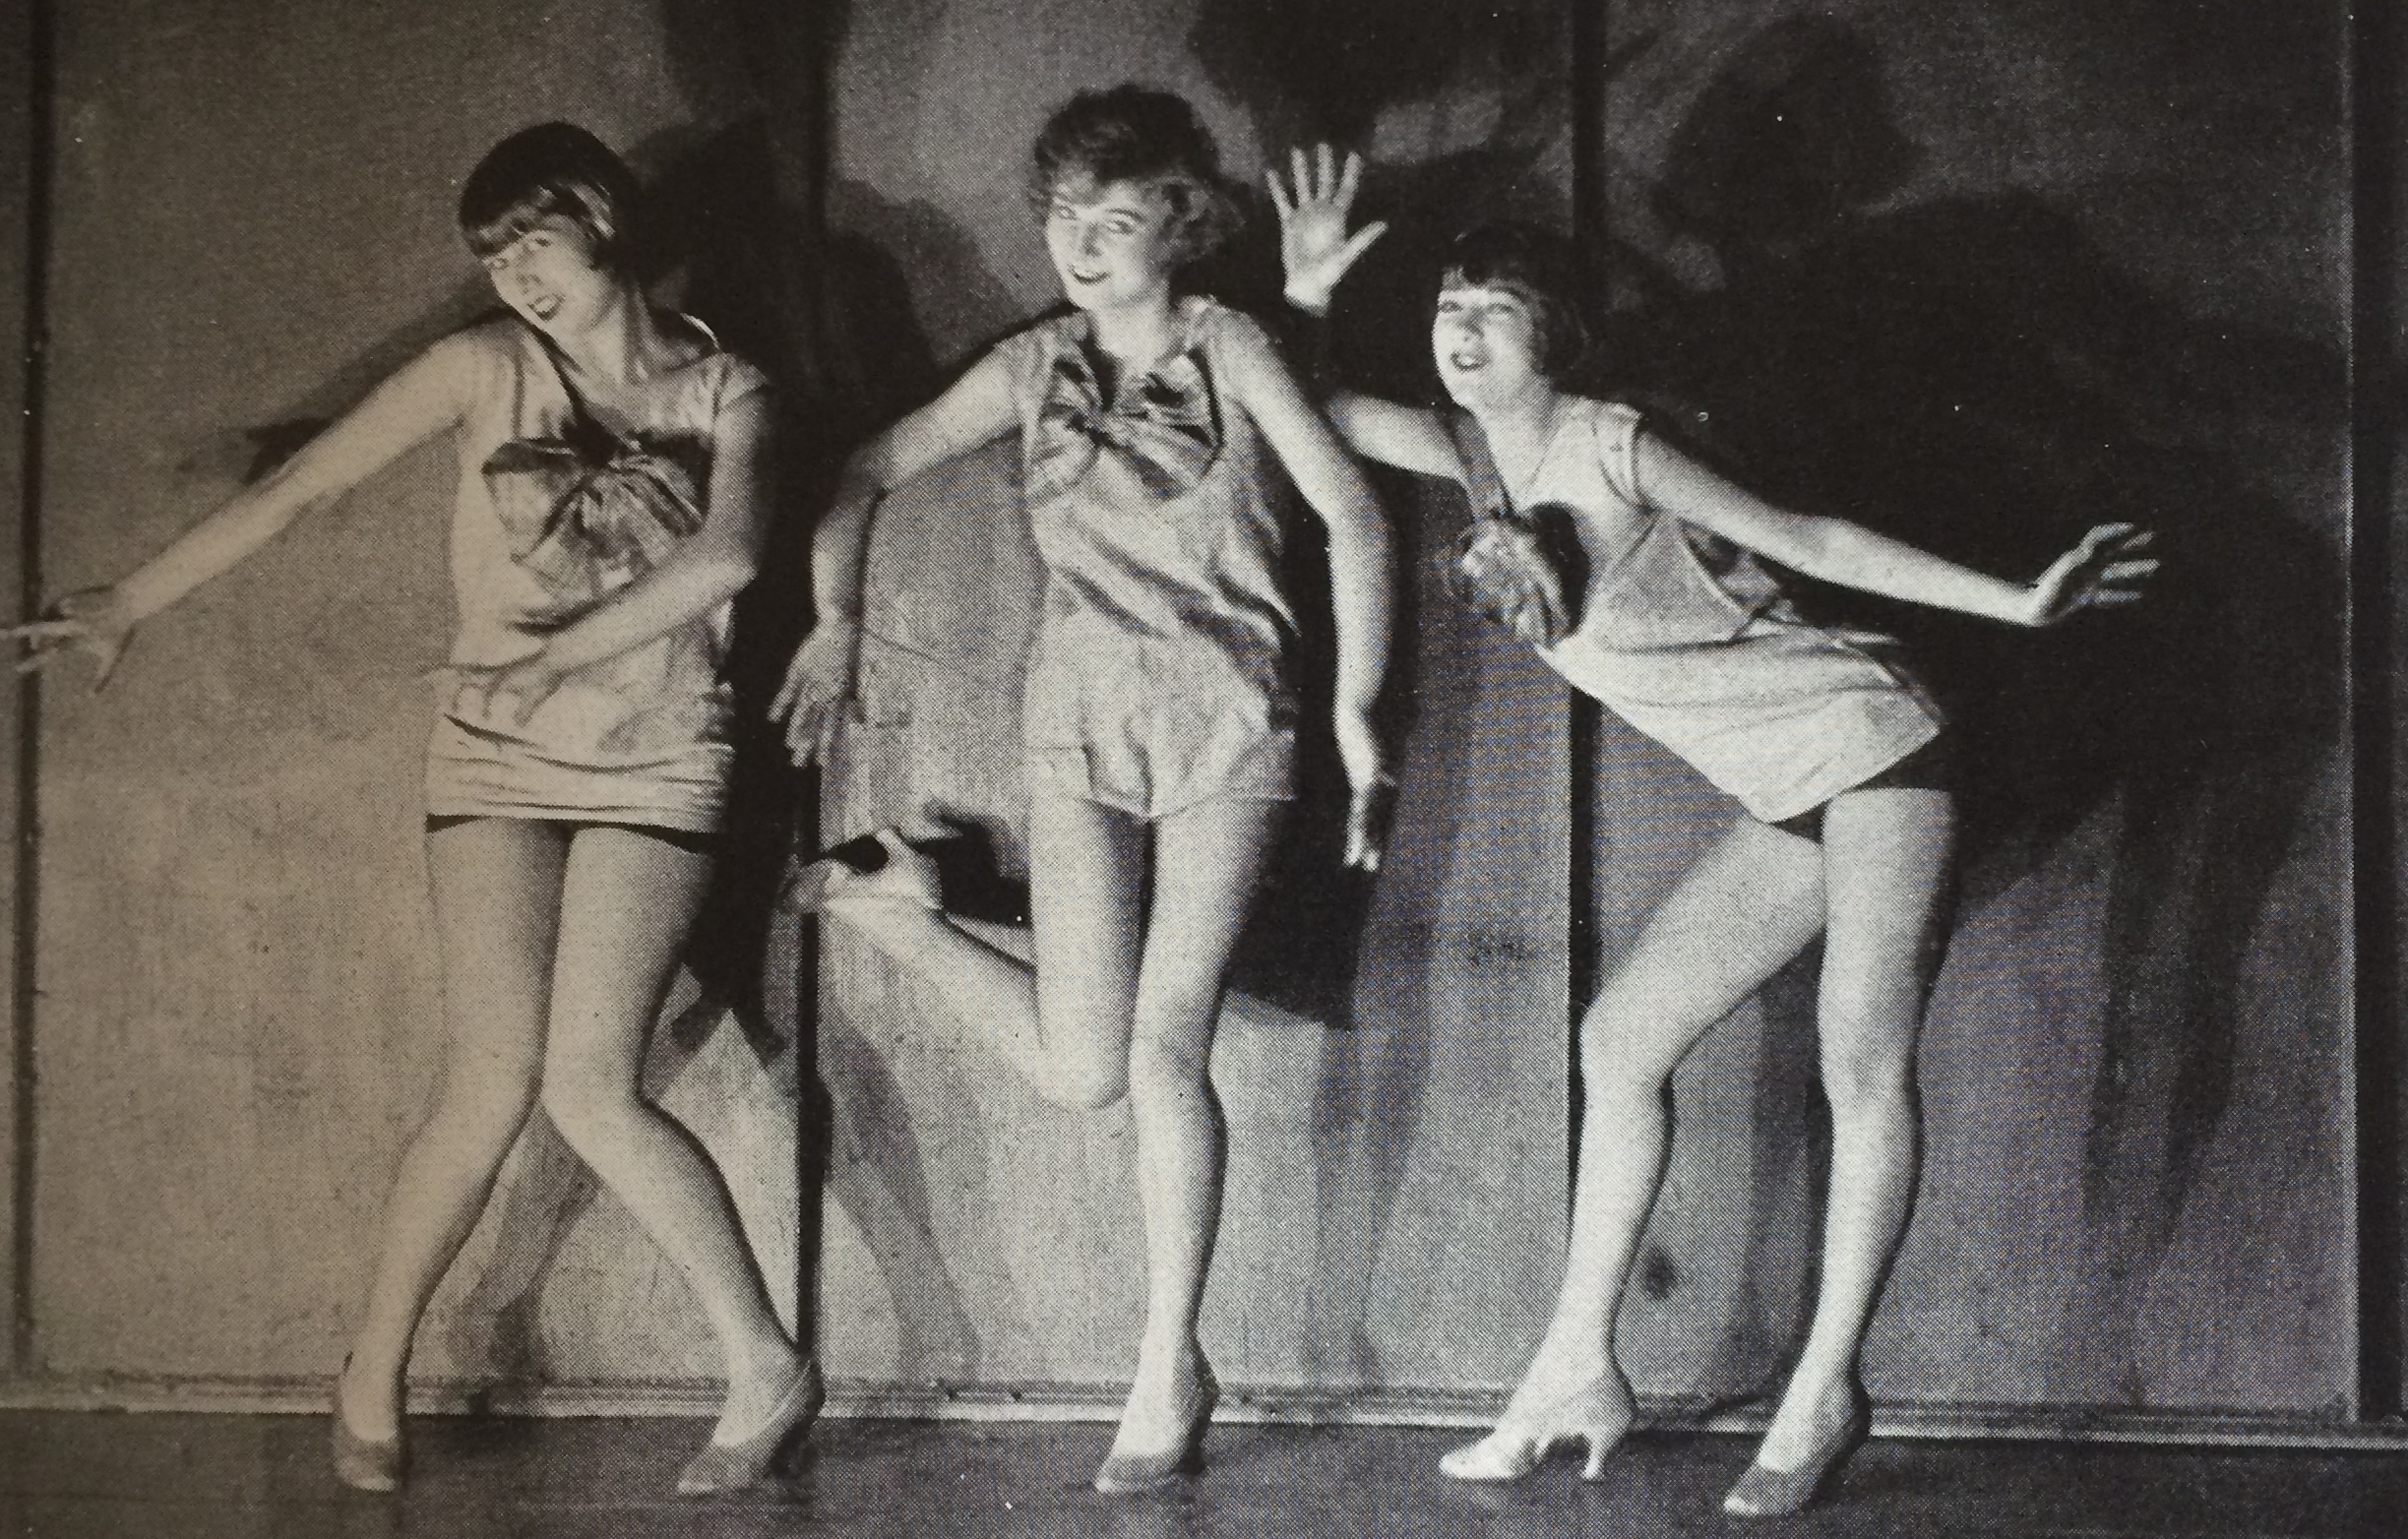 The sisters with an unknown girl at the centre (she is possibly Mlle. Florayne) in a performance in paris in 1927, photographed by James Abbe.